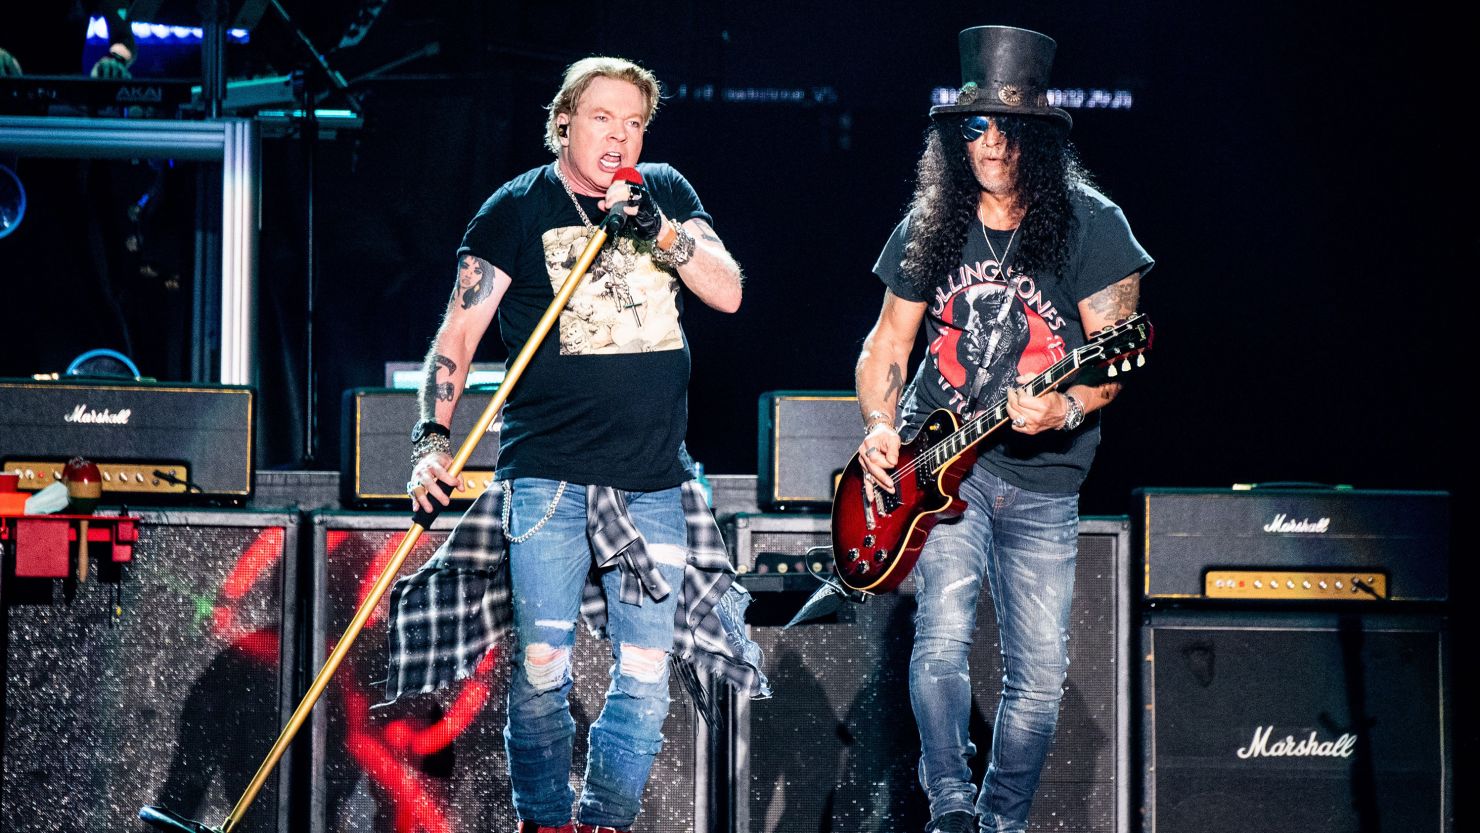 Axl Rose and Slash of Guns N' Roses perform at the Austin City Limits Music Festival in Austin, Texas, on October 4, 2019.